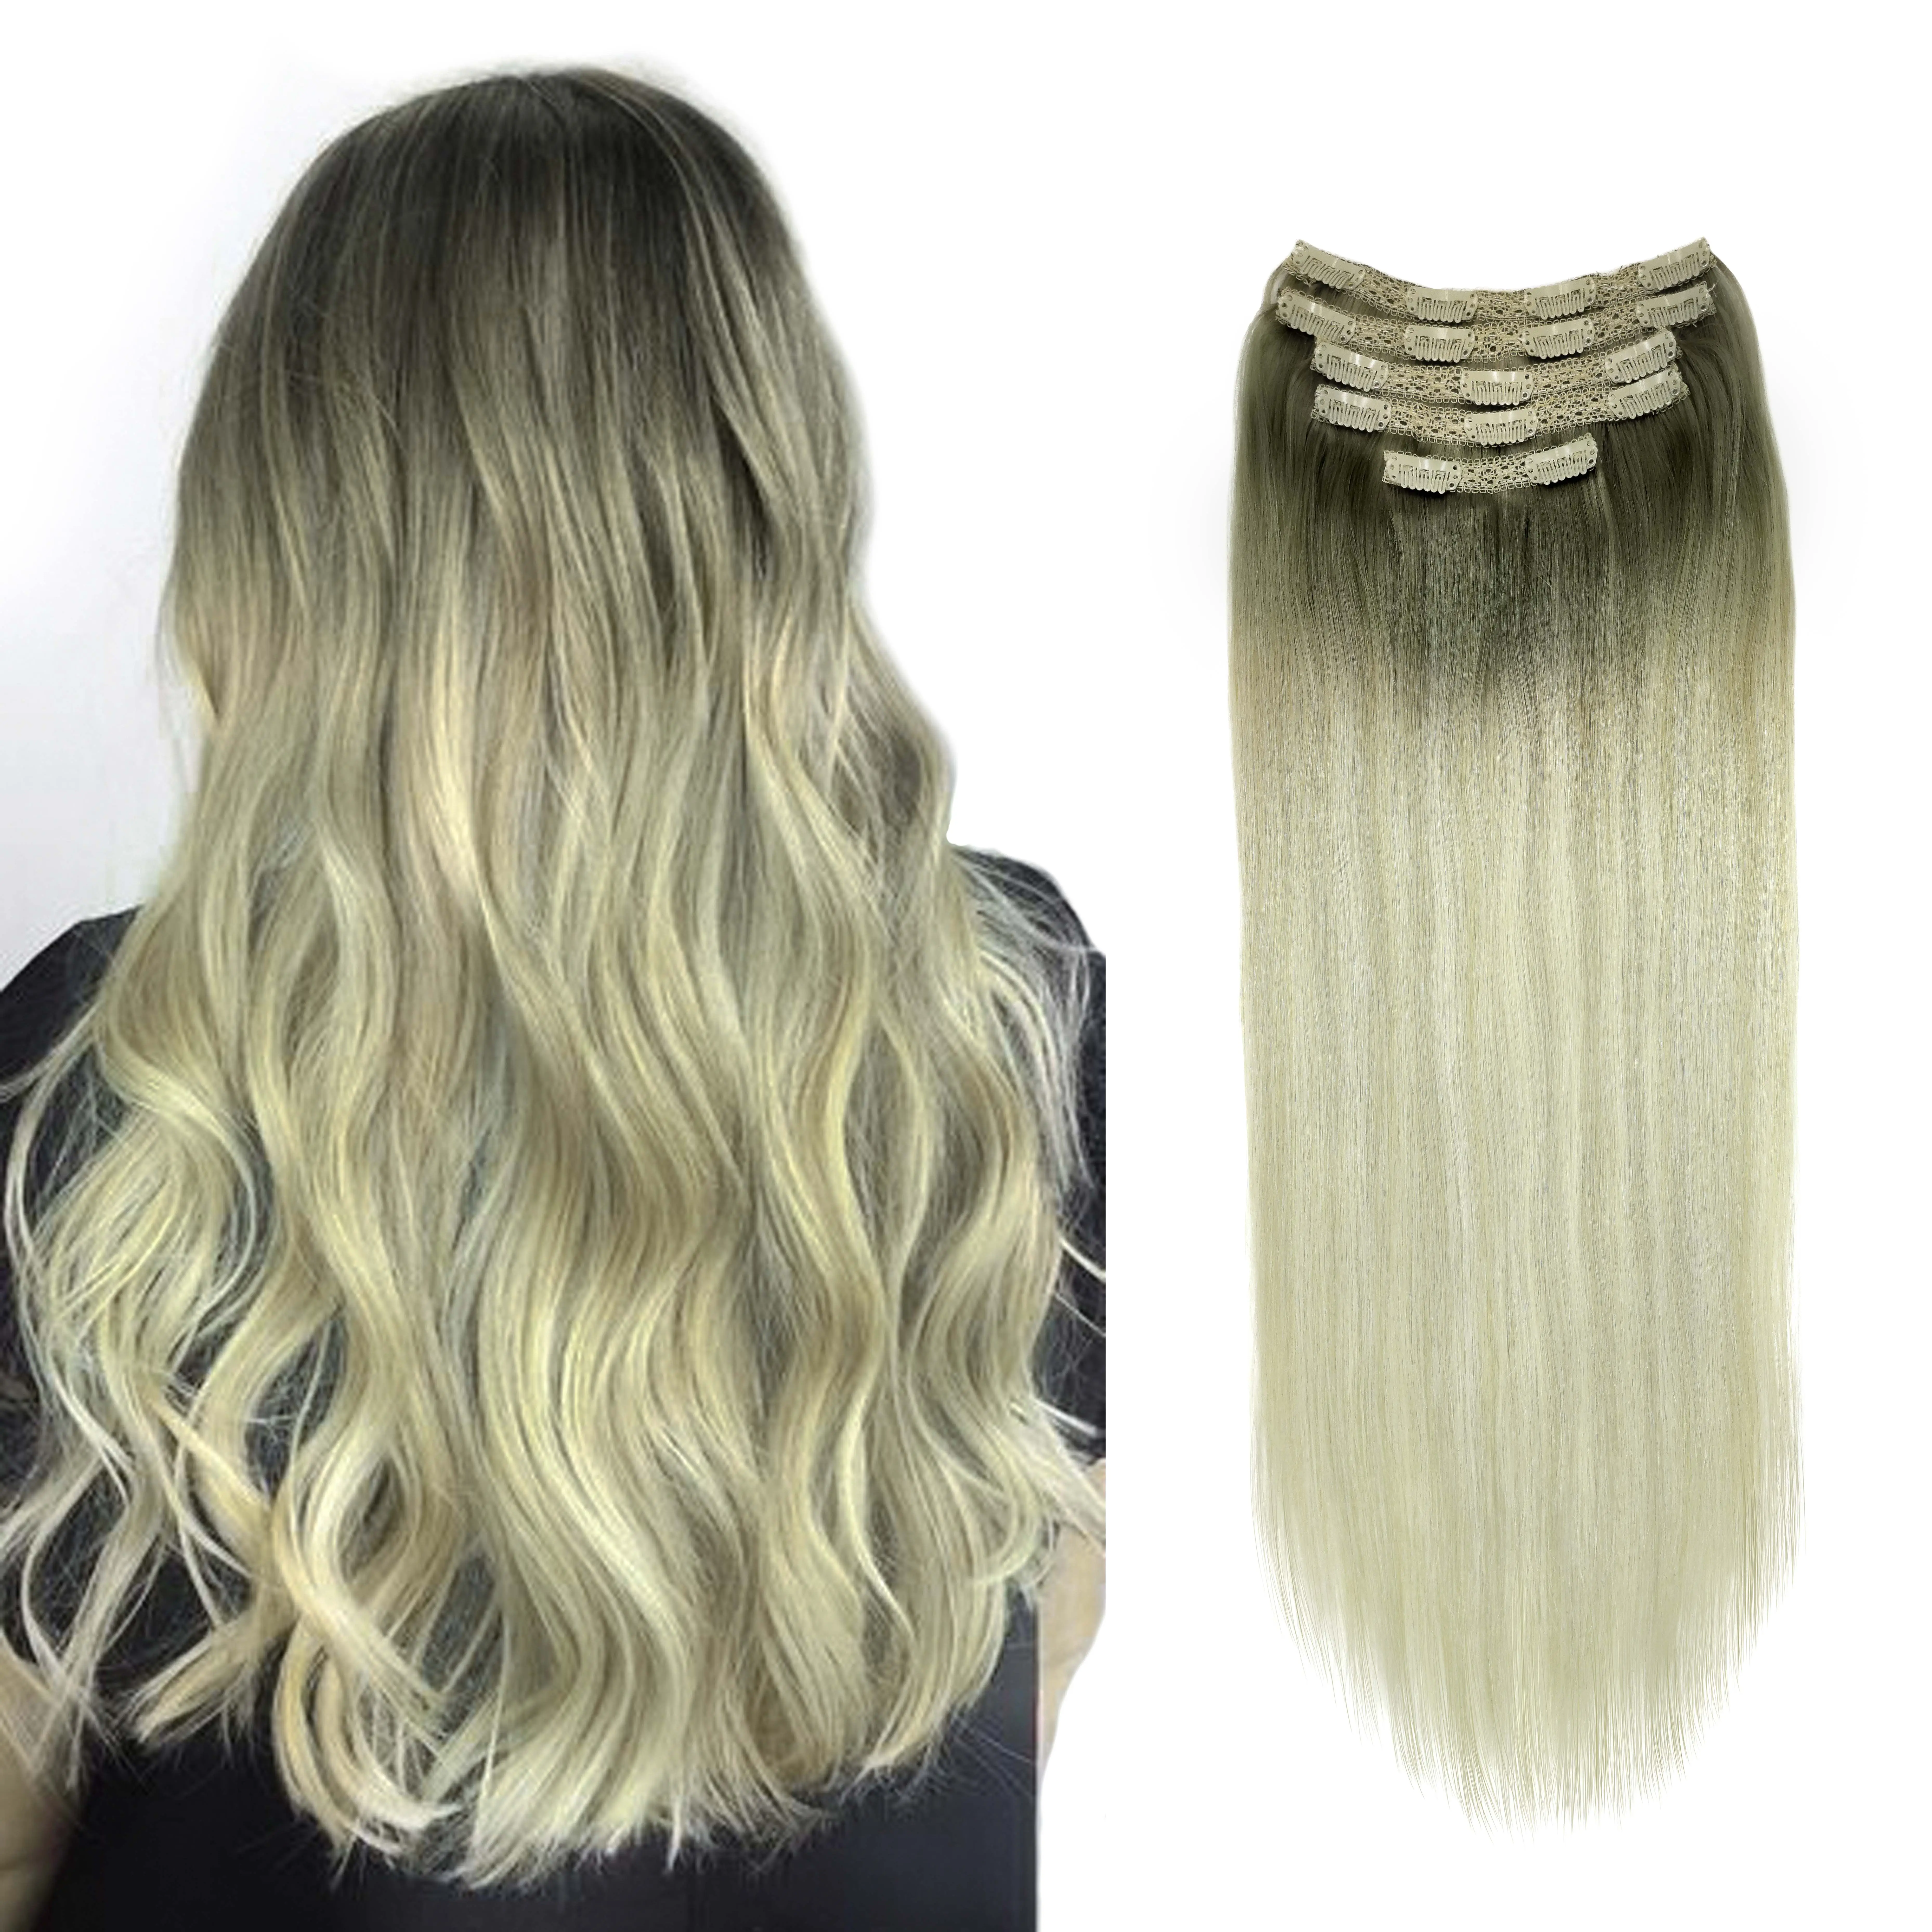 Lace Clip Ins Hair 100% Remy Human Hair Extension Natural Lace Clip in Hair Extension Blonde